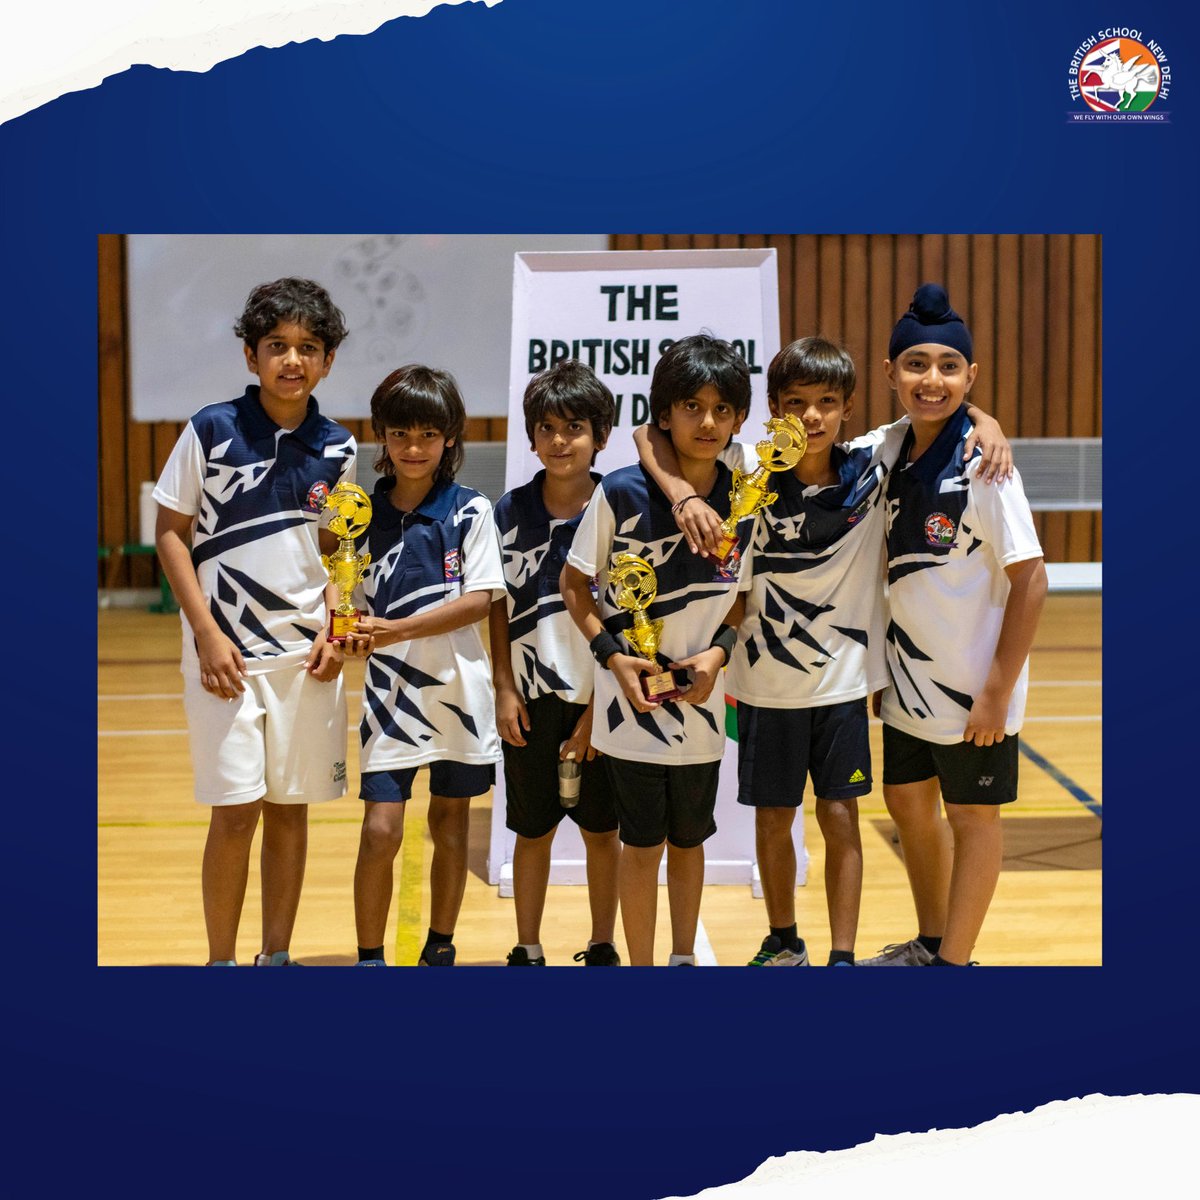 The TBS family excitedly came together for the 4th Annual Parent-Child Badminton Tournament! Both seasoned players and freshers took to the court to compete in friendly matches, creating unforgettable memories. Here is a glimpse of their day. 🏸🤩
#TBSDelhi #TBSCommunity